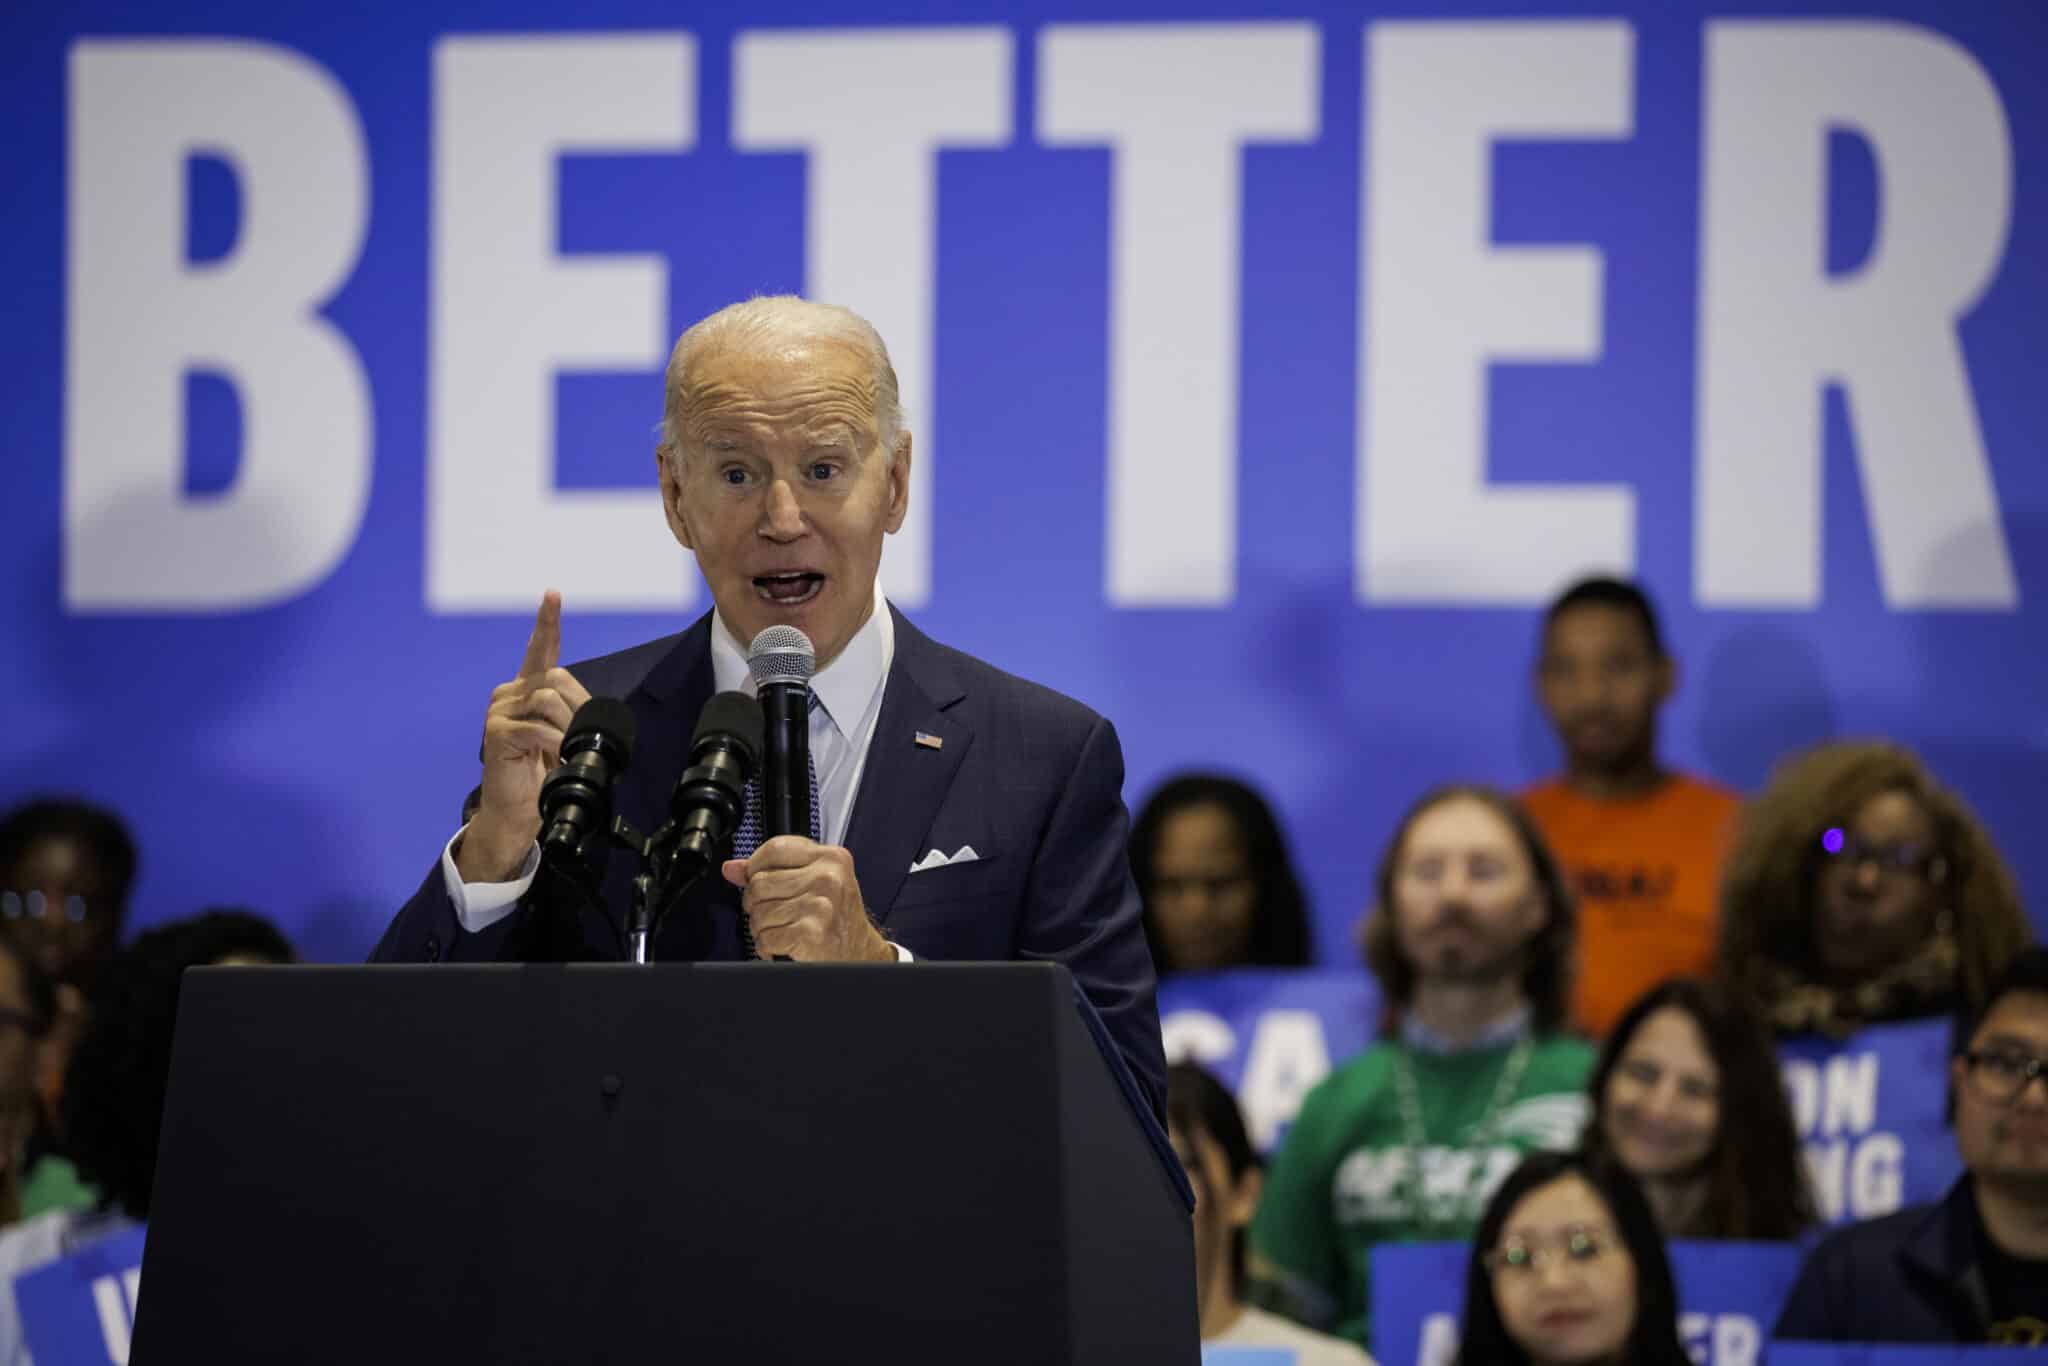 WASHINGTON, DC - SEPTEMBER 23: U.S. President Joe Biden speaks during a Democratic National Committee event at the headquarters of the National Education Association on September 23, 2022 in Washington, DC. The president urged supporters to vote in the upcoming midterm elections this November. (Photo by Samuel Corum/Getty Images)